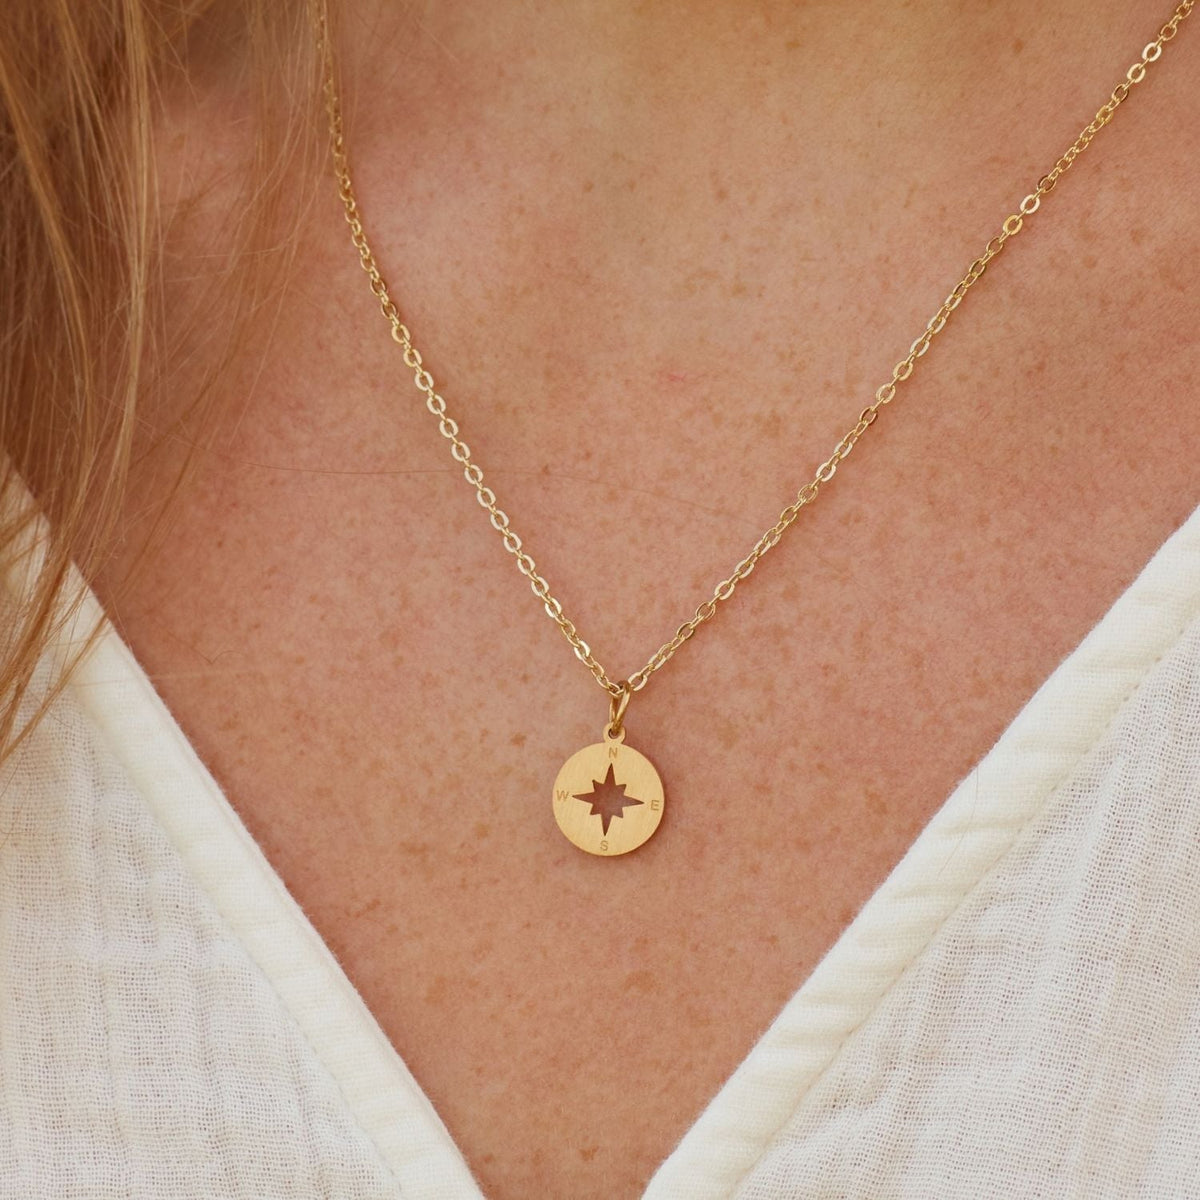 To A Fine Young Woman on Her Confirmation | May the Holy Spirit | Compass Necklace